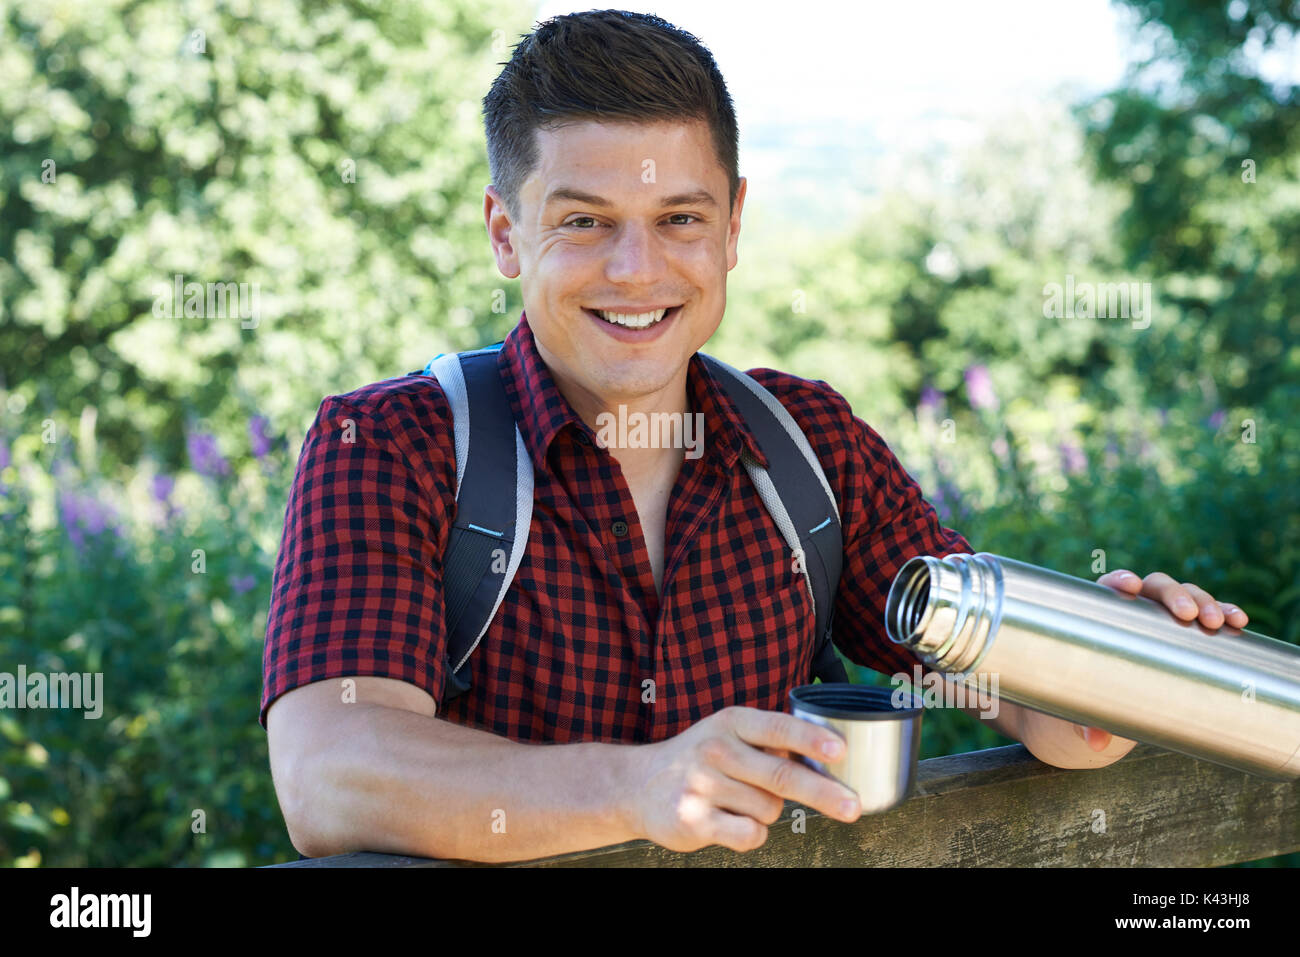 Portrait Of Man Pouring Hot Drink From Flask On Walk Stock Photo